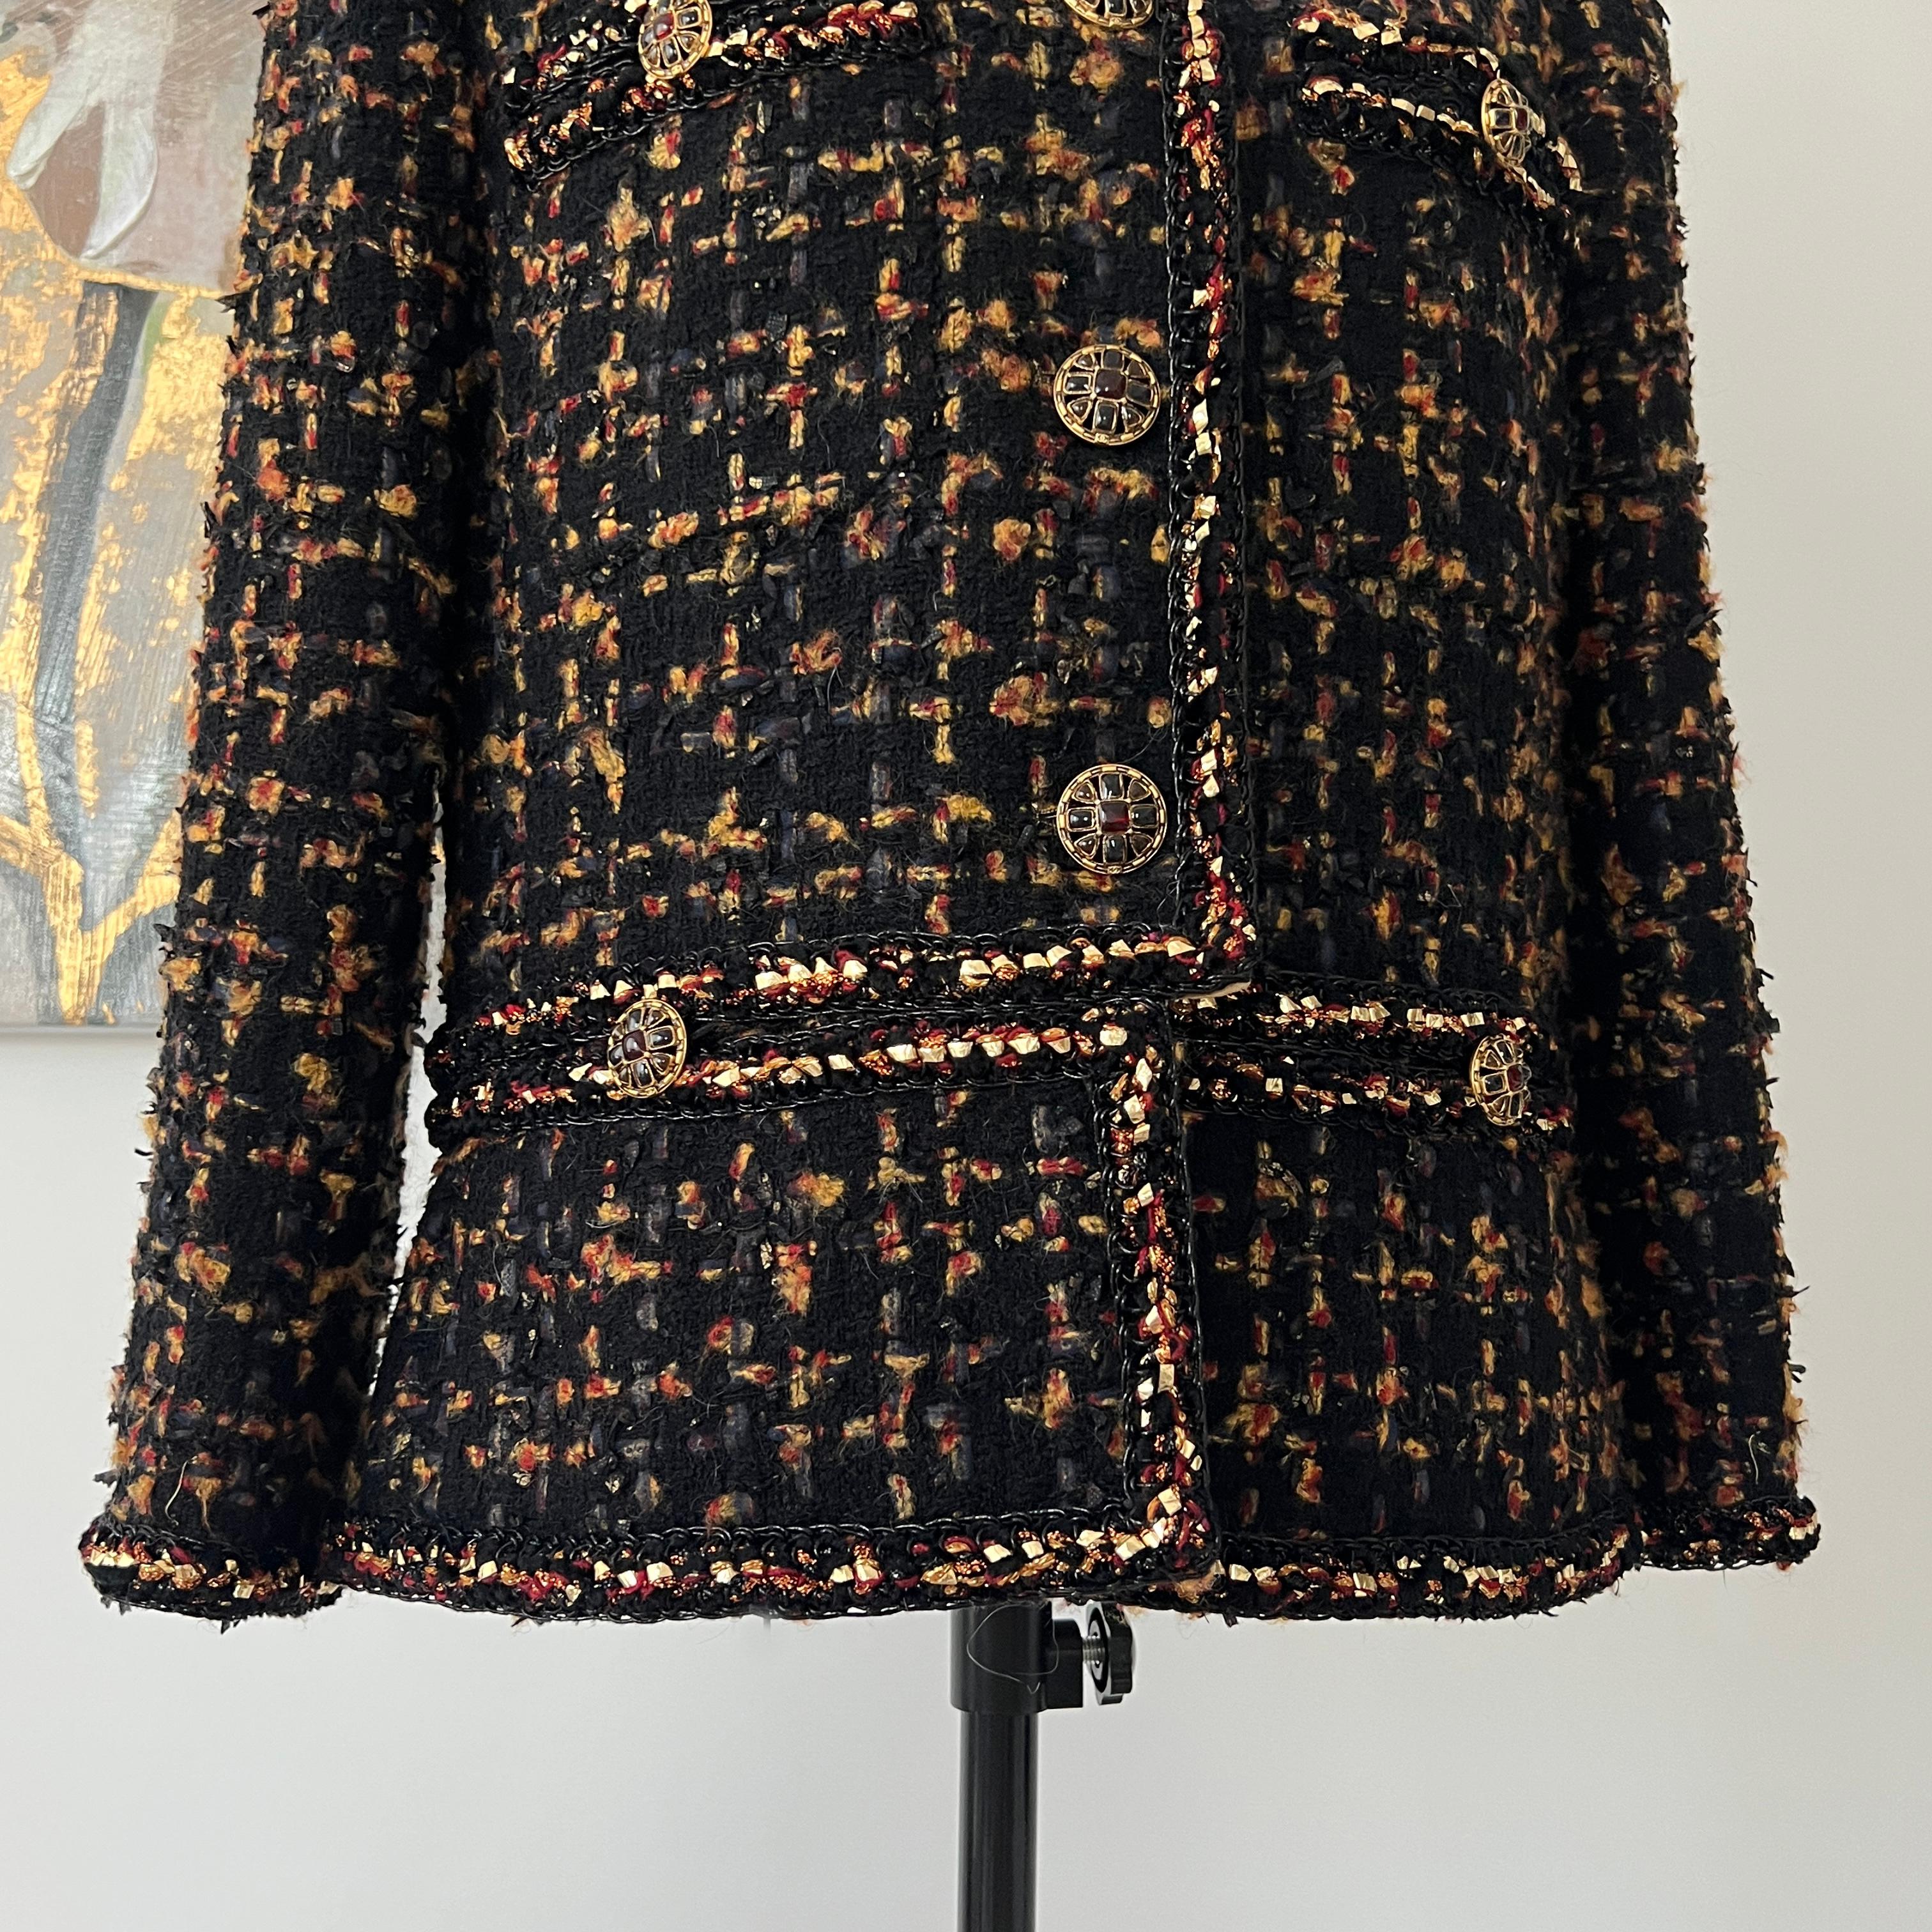 Chanel New-York Collection Black Tweed Jacket, 2019 For Sale 10